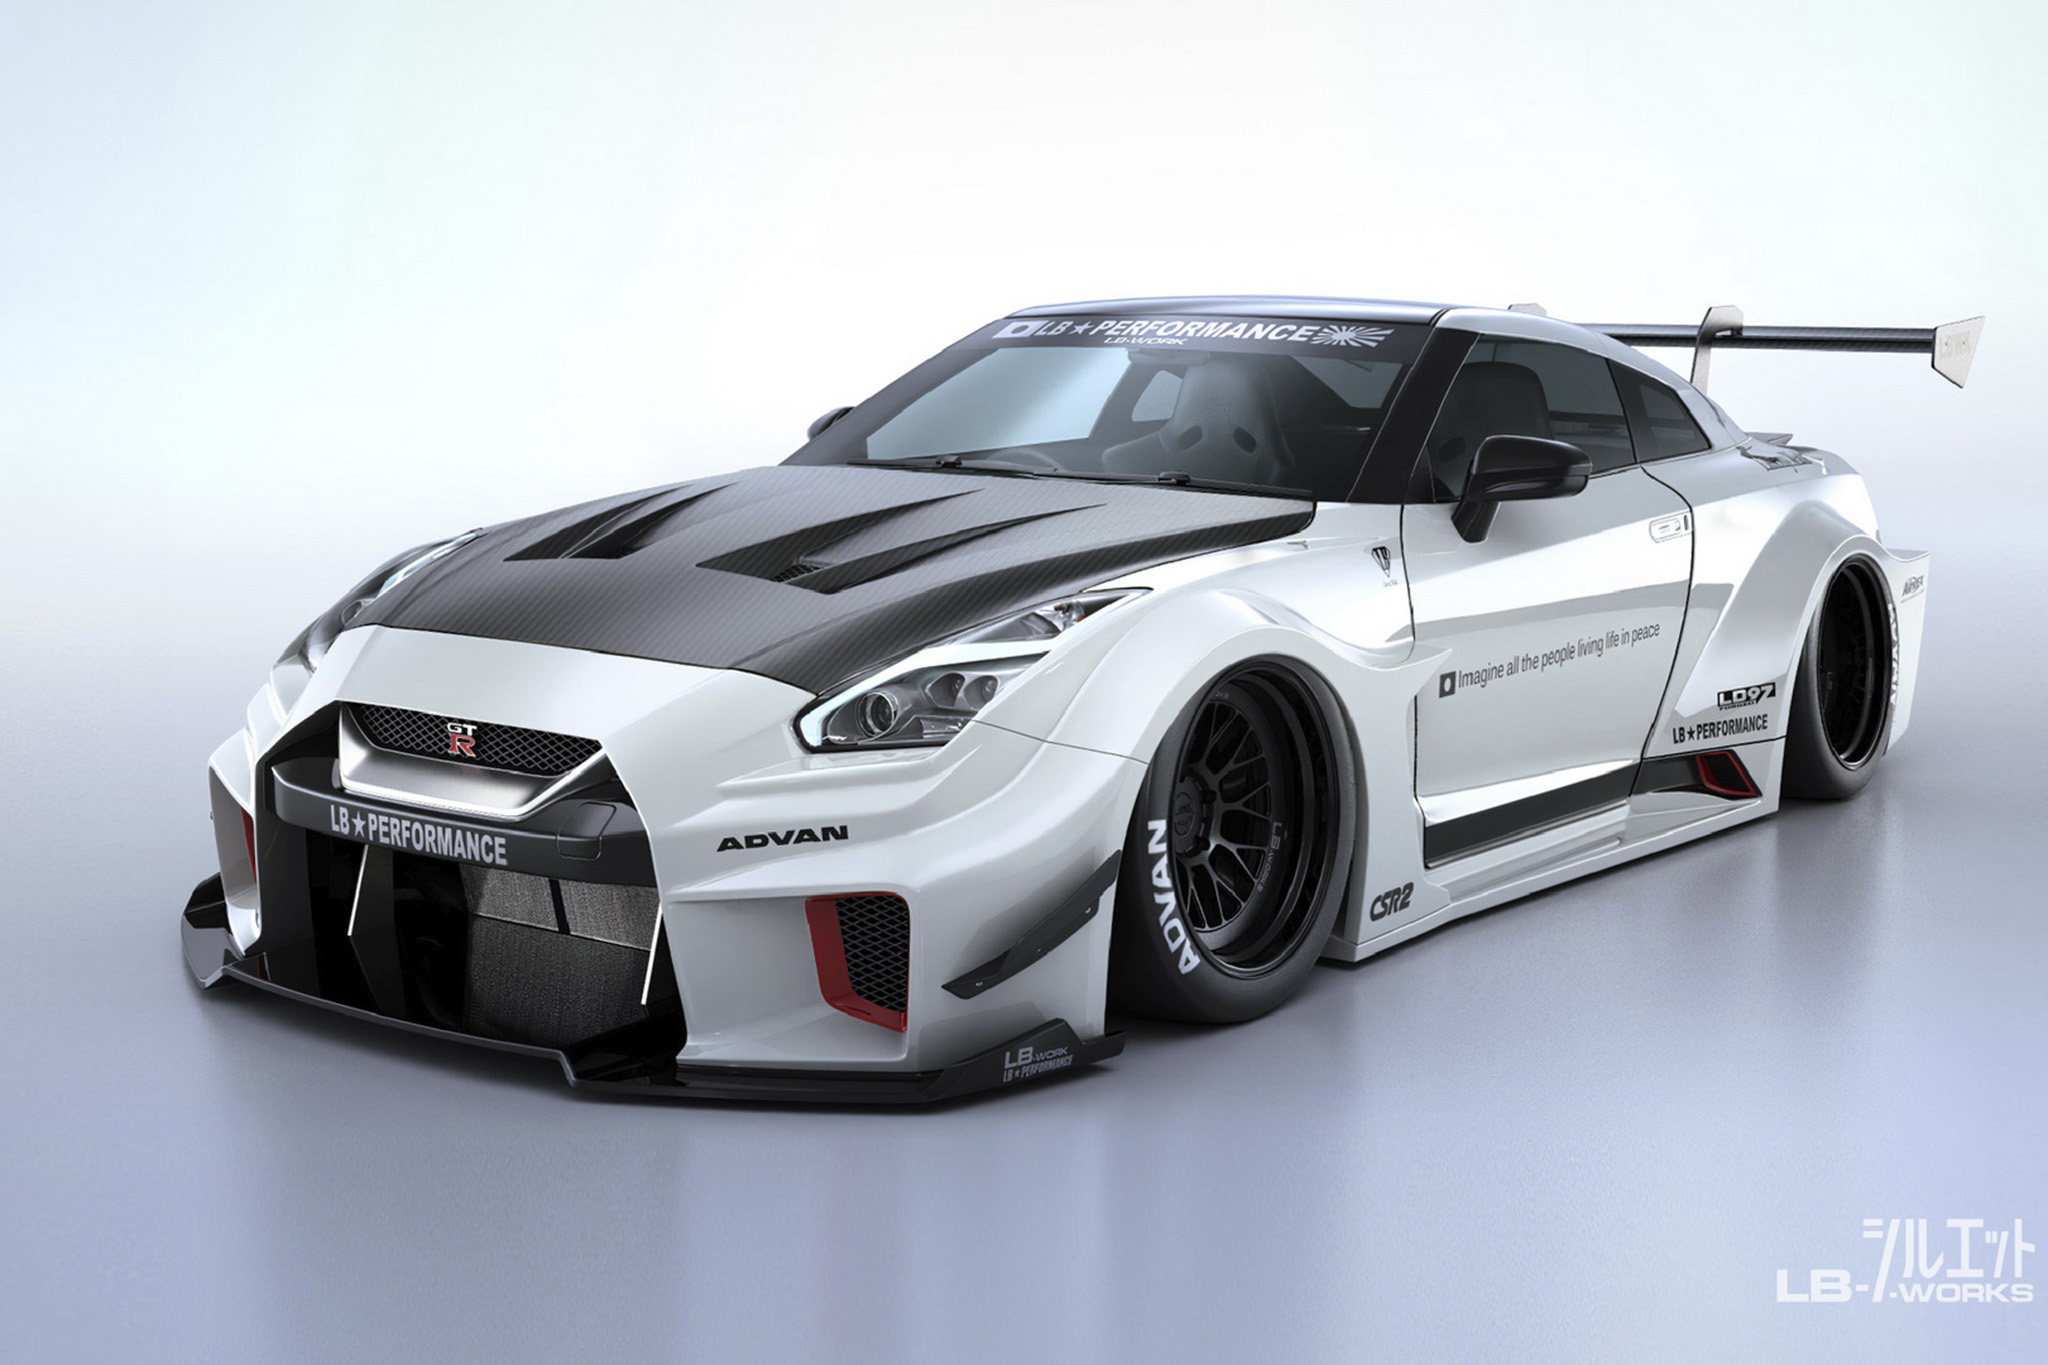 Liberty Walk Updates the Nissan GT-R With Silhouette Works Bodykit